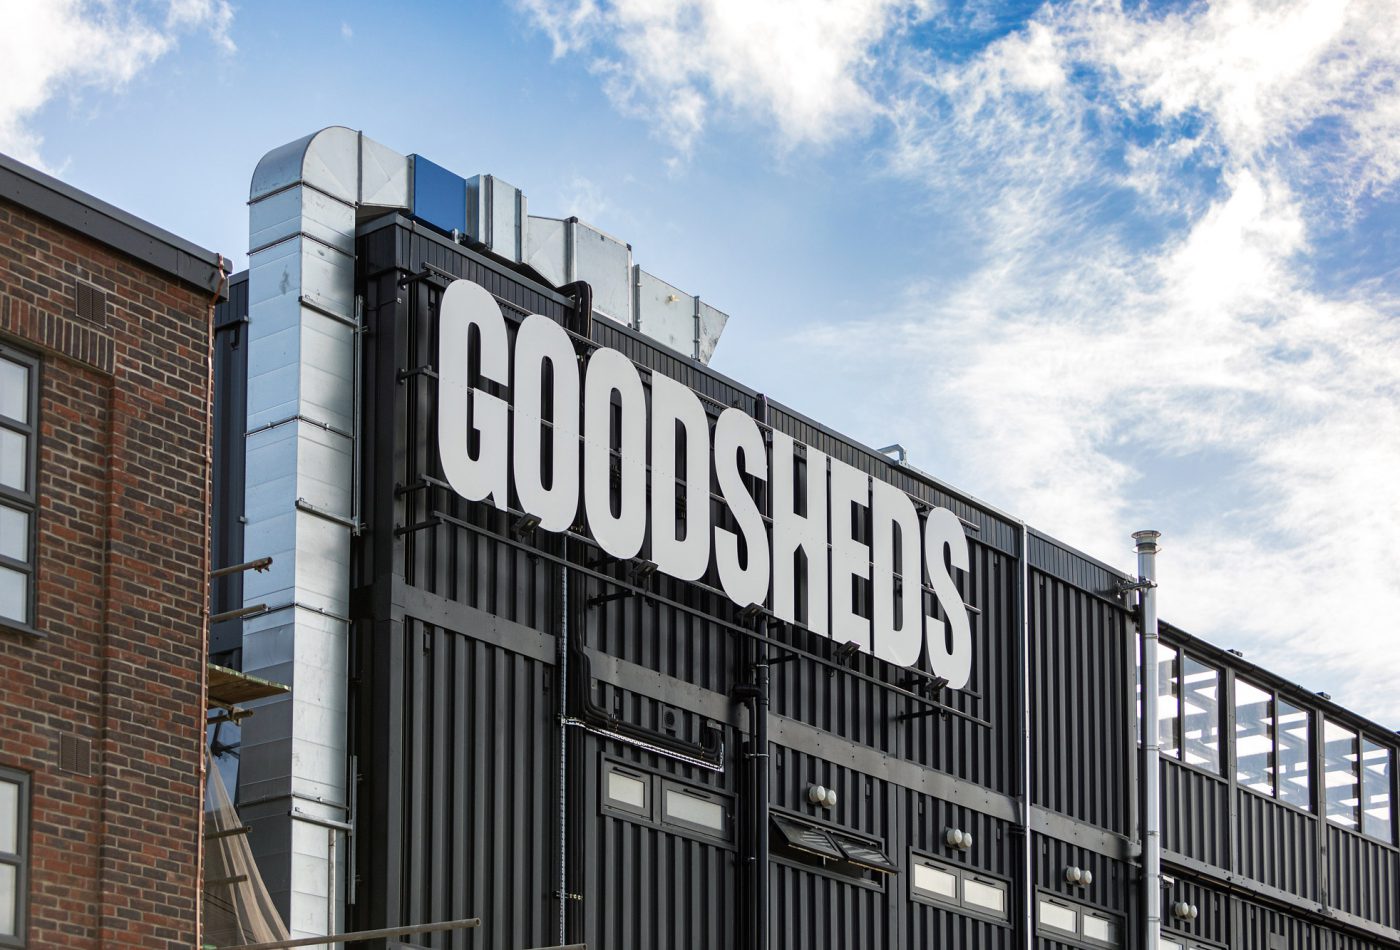 Goodsheds signage Barry spotlit on a shipping container